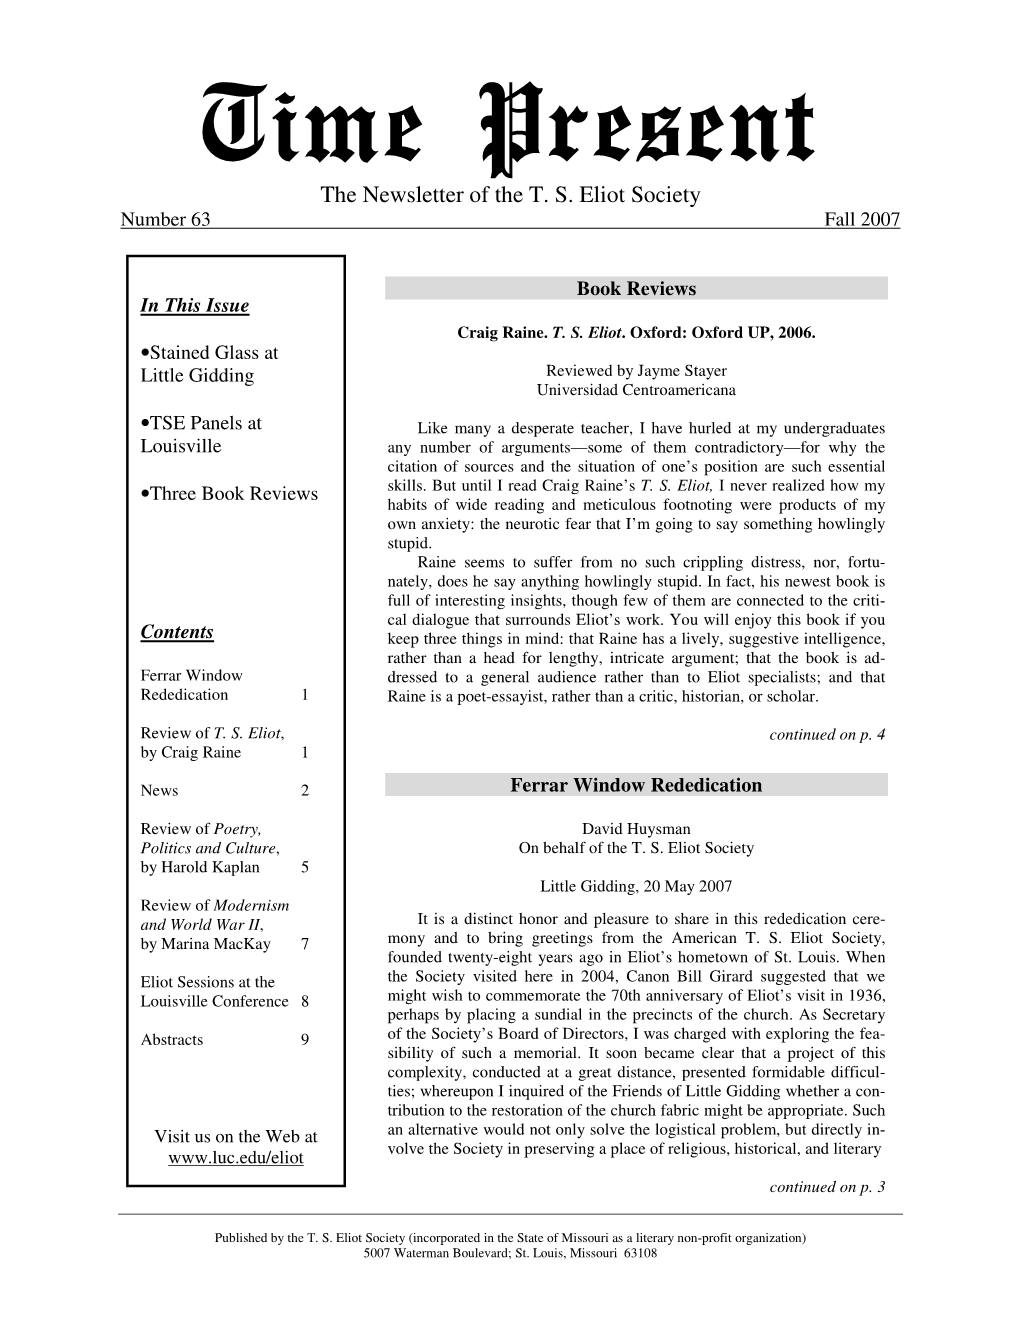 The Newsletter of the T. S. Eliot Society Number 63 Fall 2007